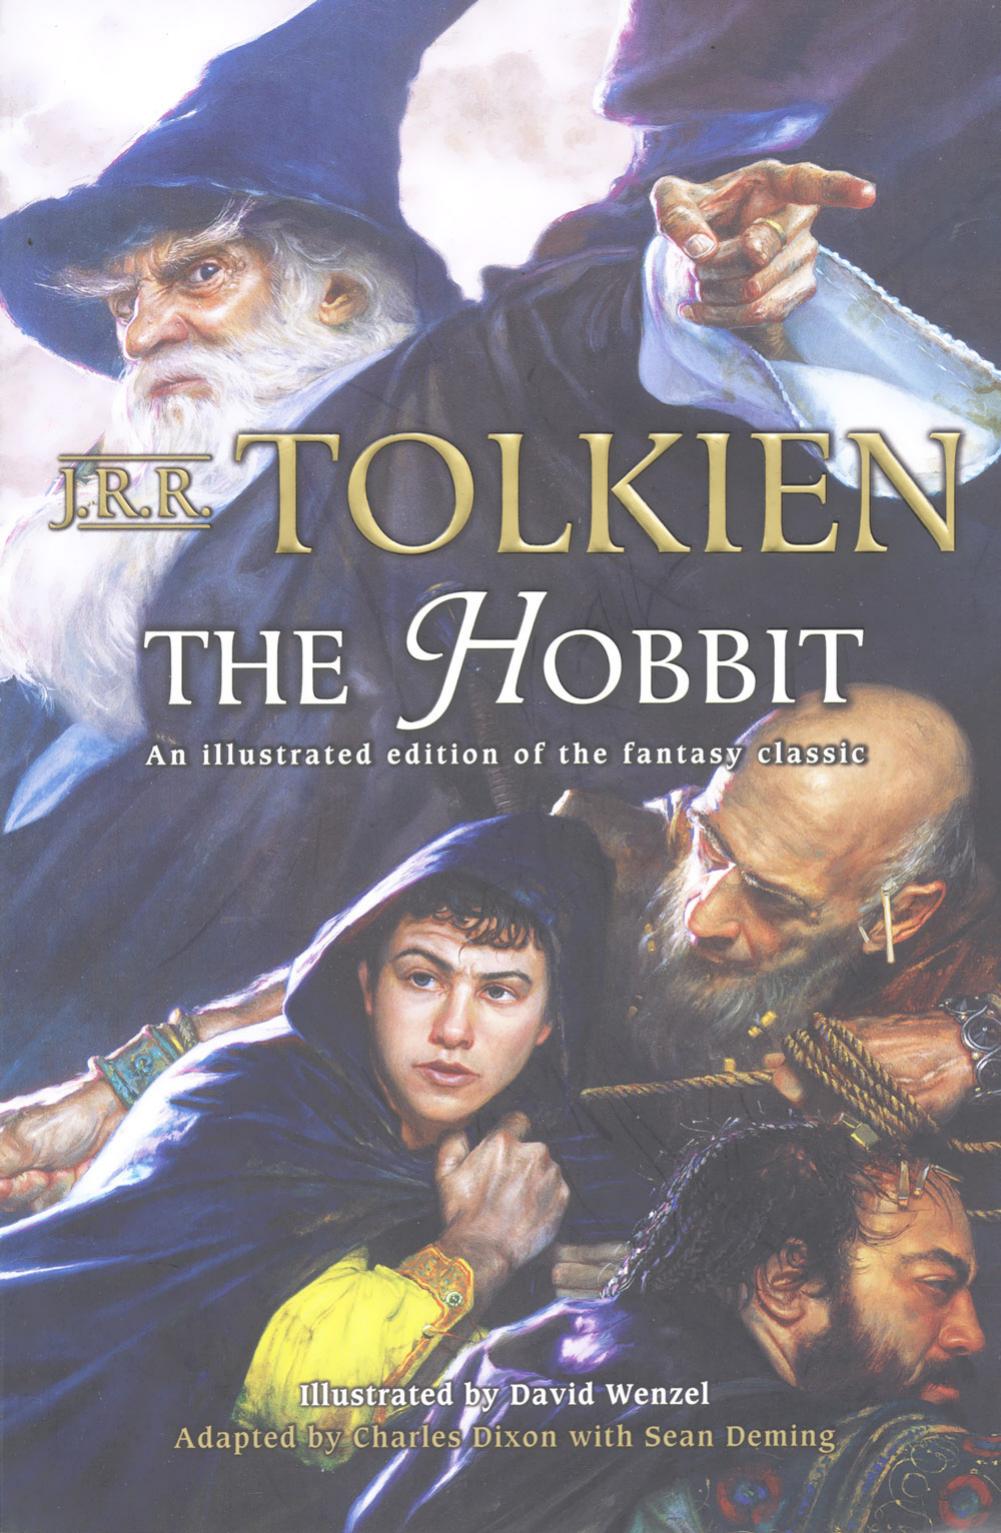 The Hobbit: An Illustrated Edition of the Fantasy Classic